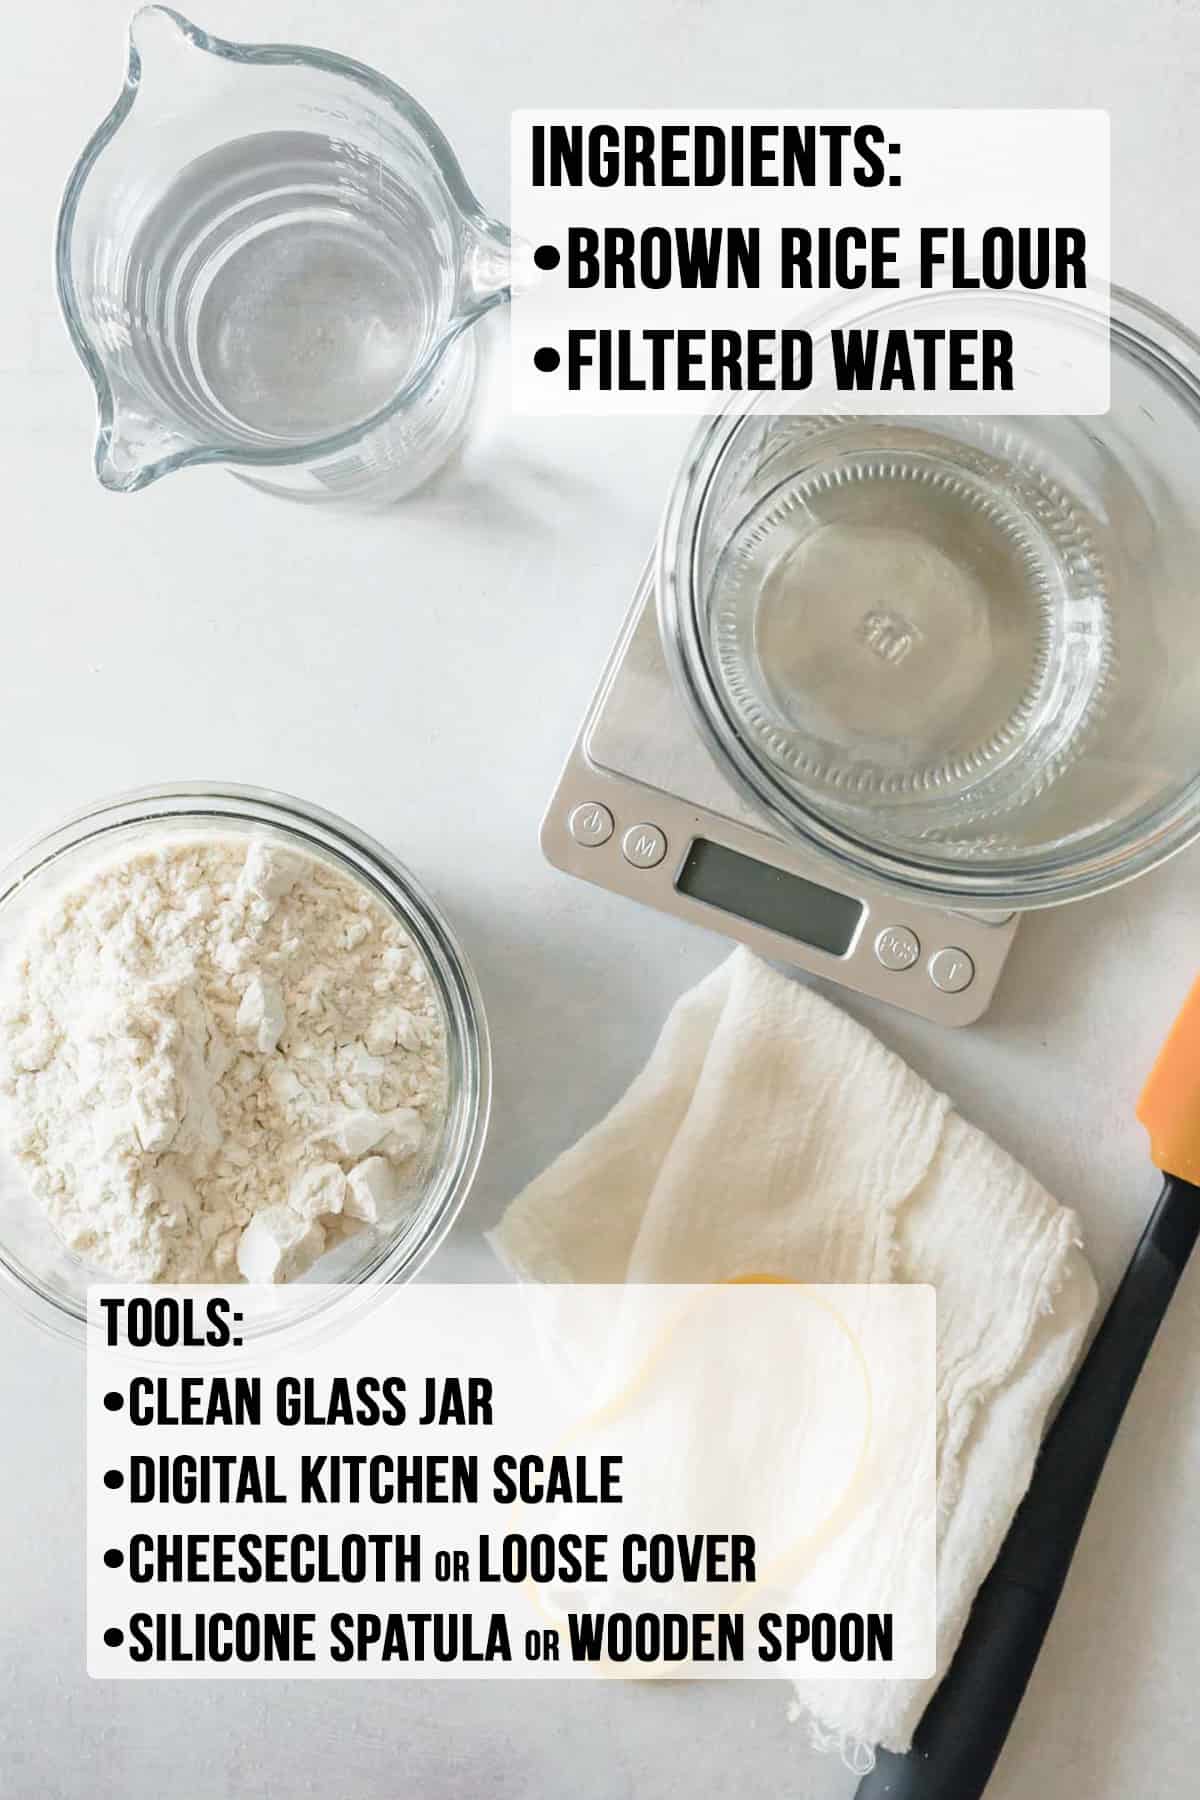 Brown rice flour, water, a clean jar, and a kitchen scale on table.